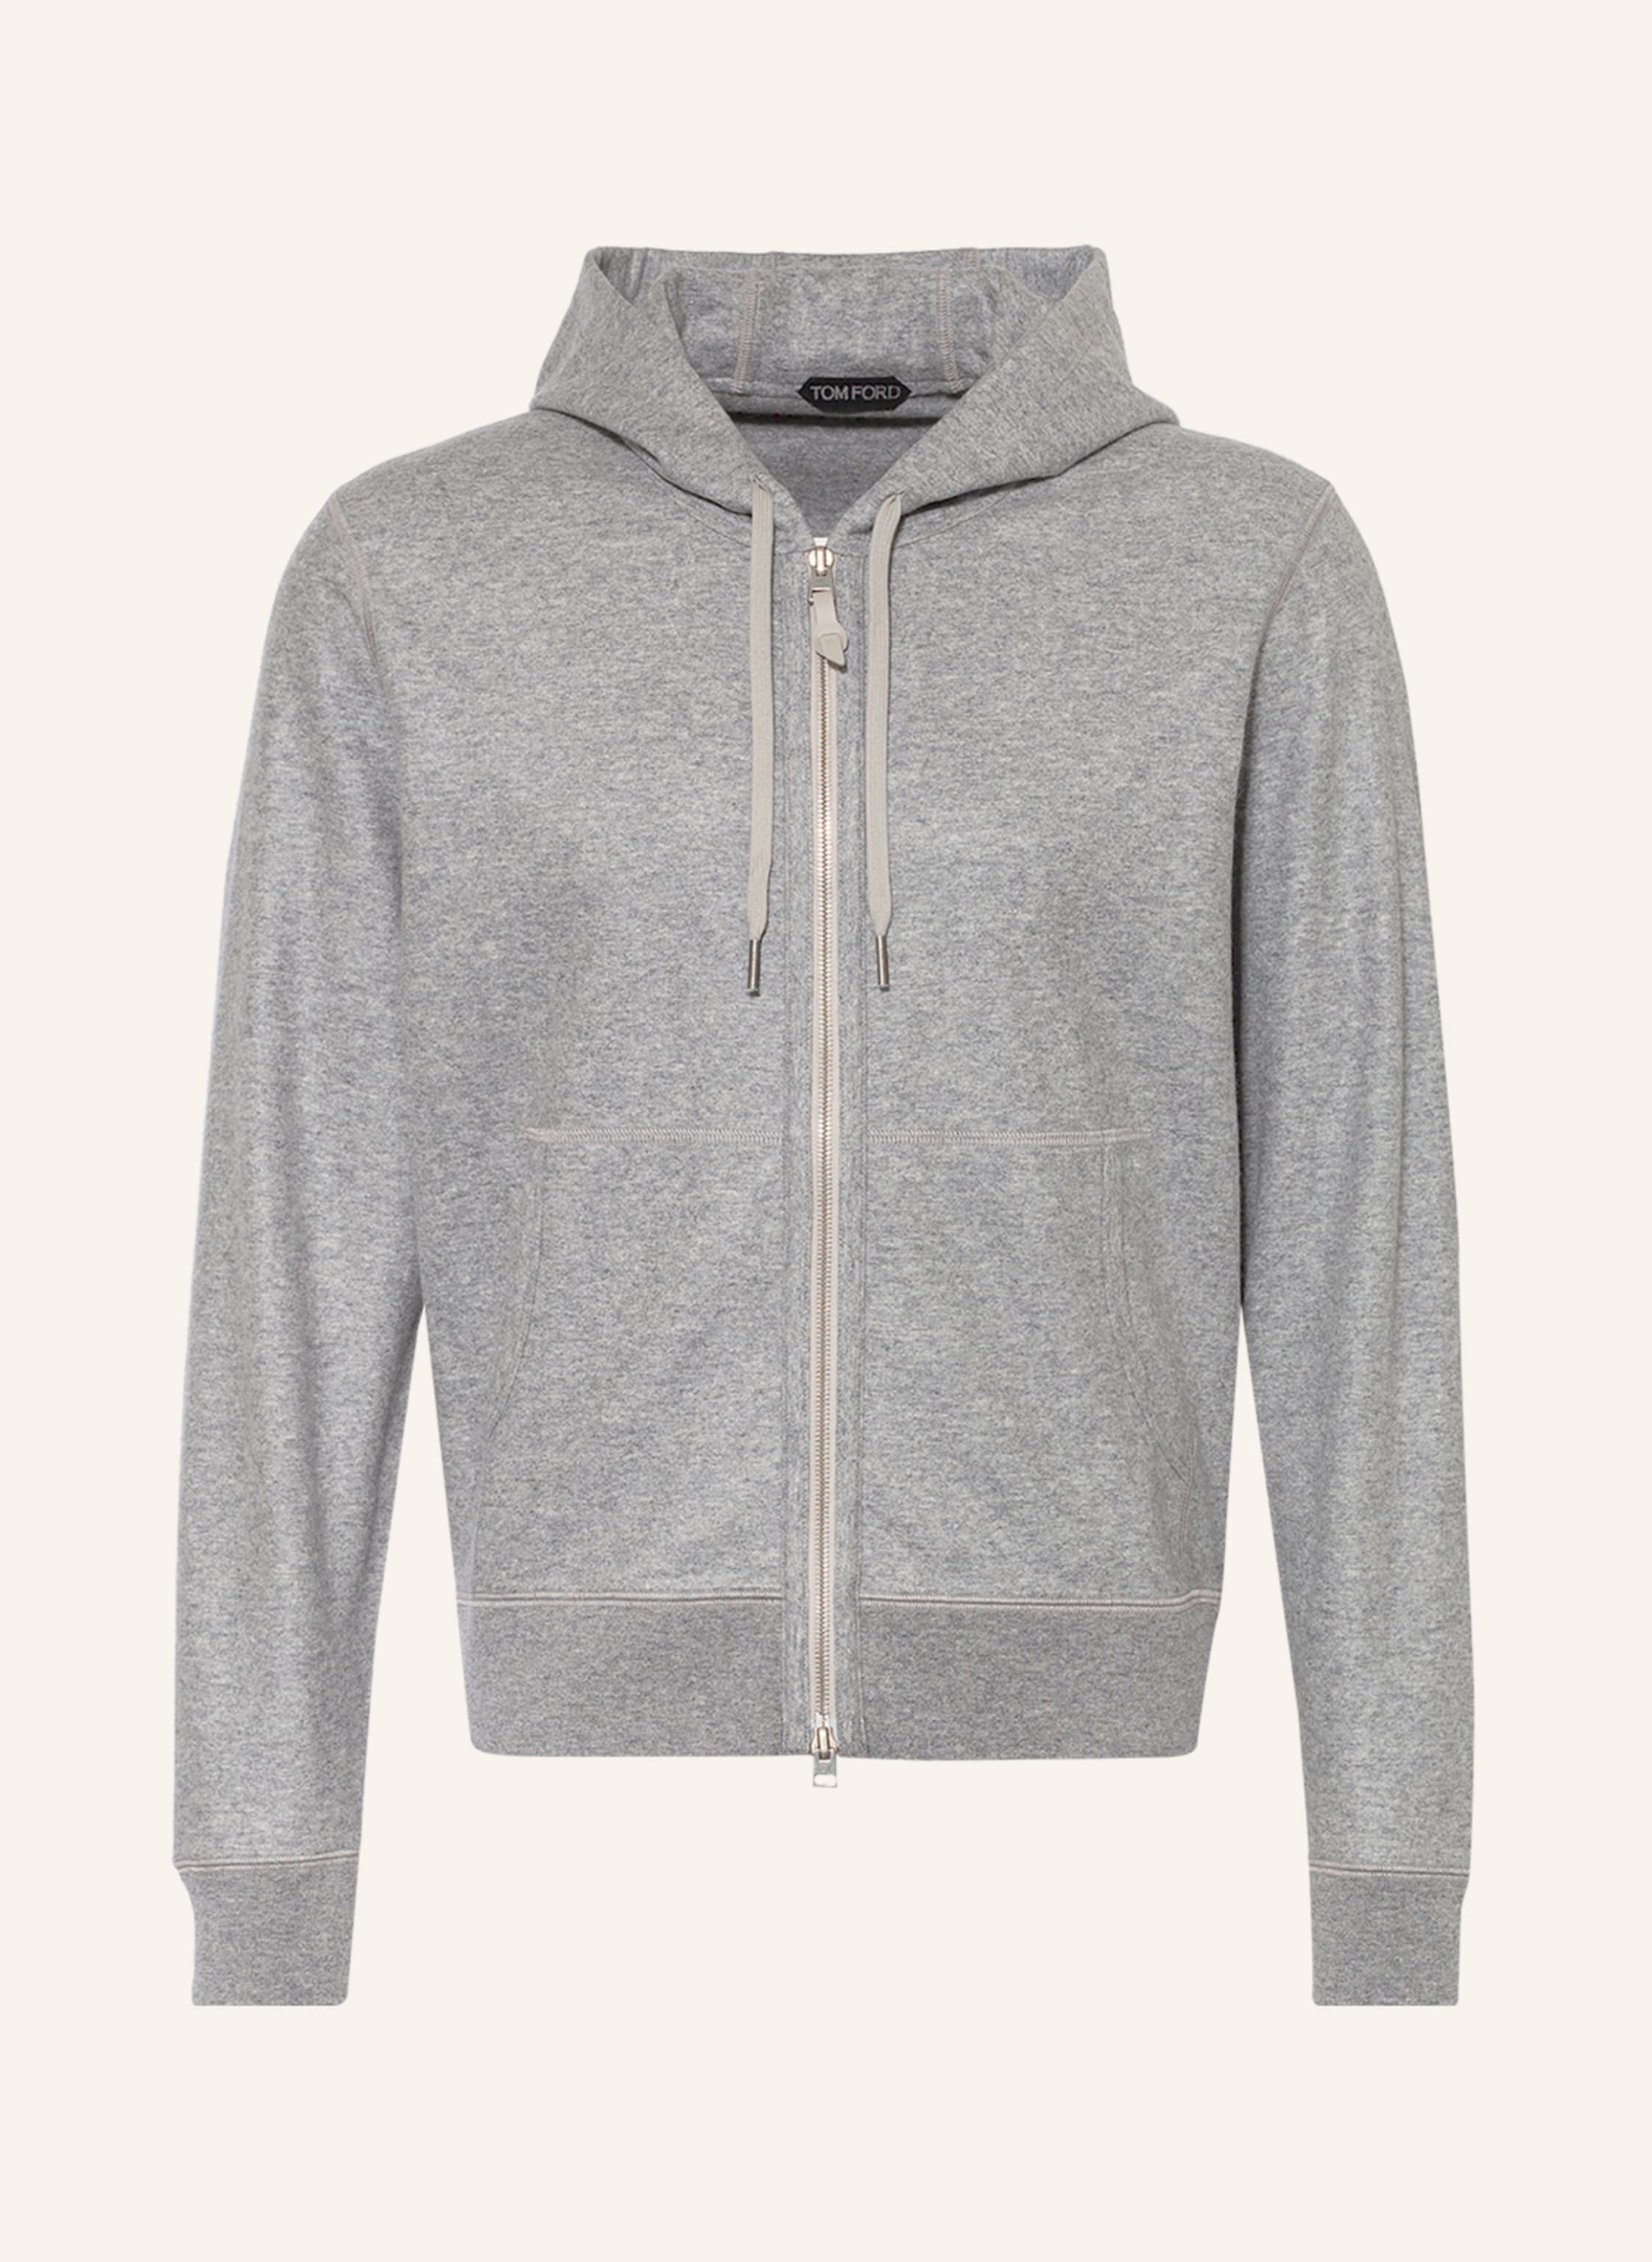 TOM FORD Zip-up hoodie made of cashmere in gray | Breuninger